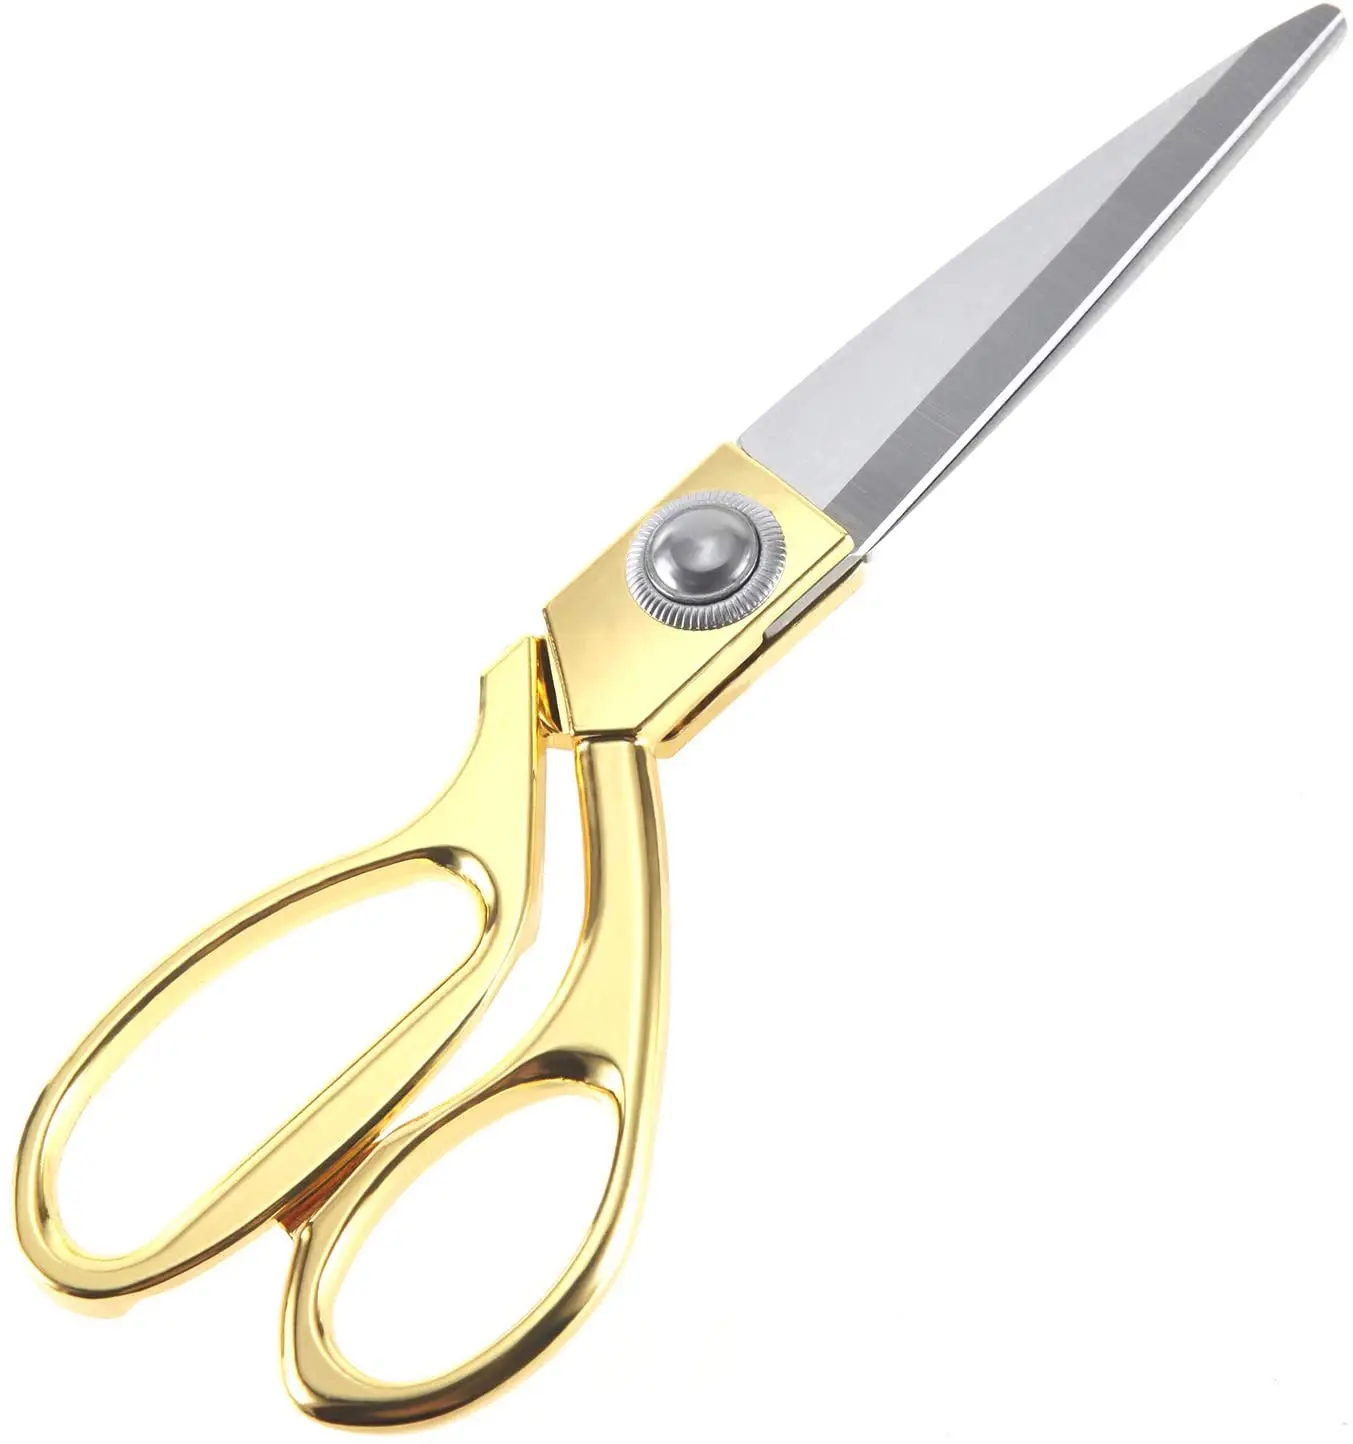 10.5'' Gold Fabric Scissors Stainless Steel sharp Tailor Scissors clothing  scissors Professional Heavy Duty Dressmaking Shears Sewing Tailor 